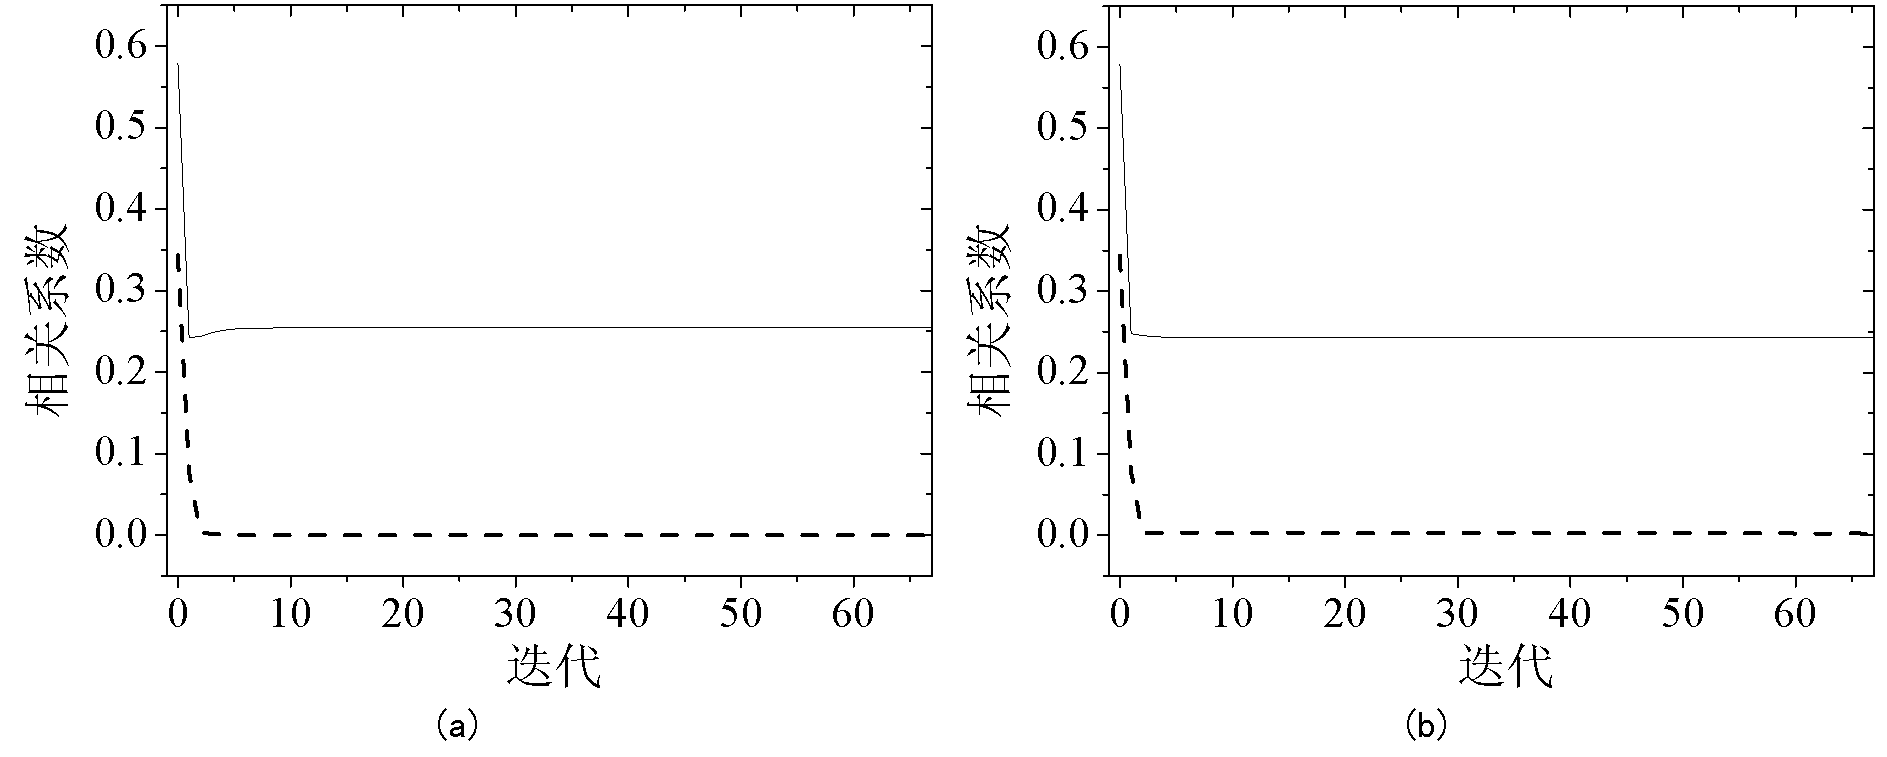 Approximation optimization and signal acquisition reconstruction method for 0-1 sparse cyclic matrix